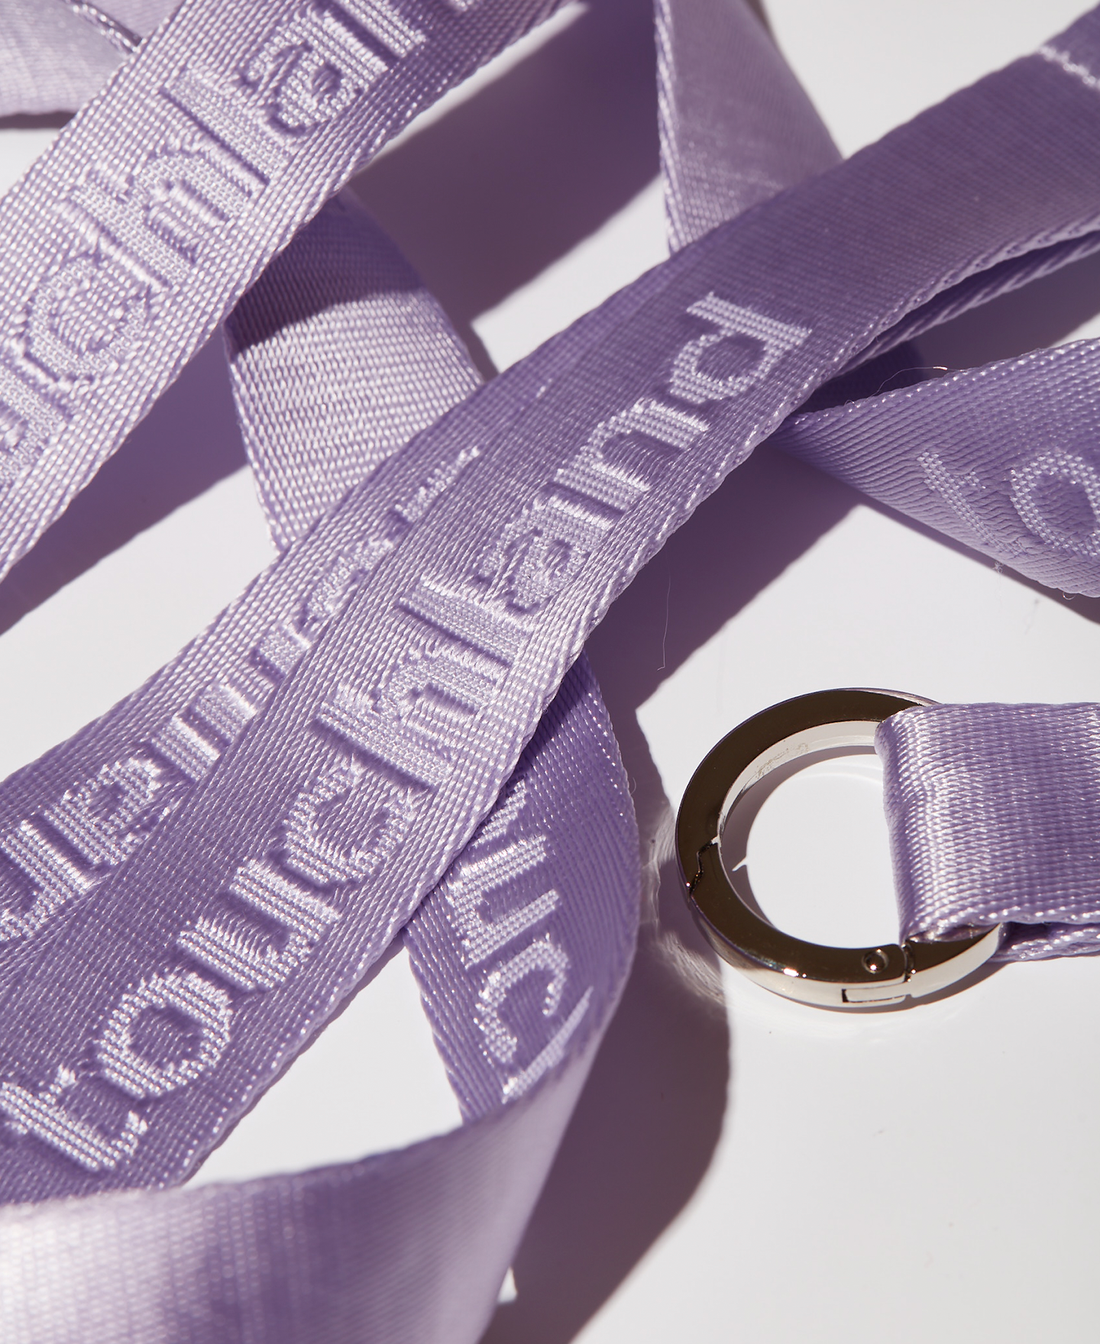 Zoomed in violet lanyards overlapping on white background